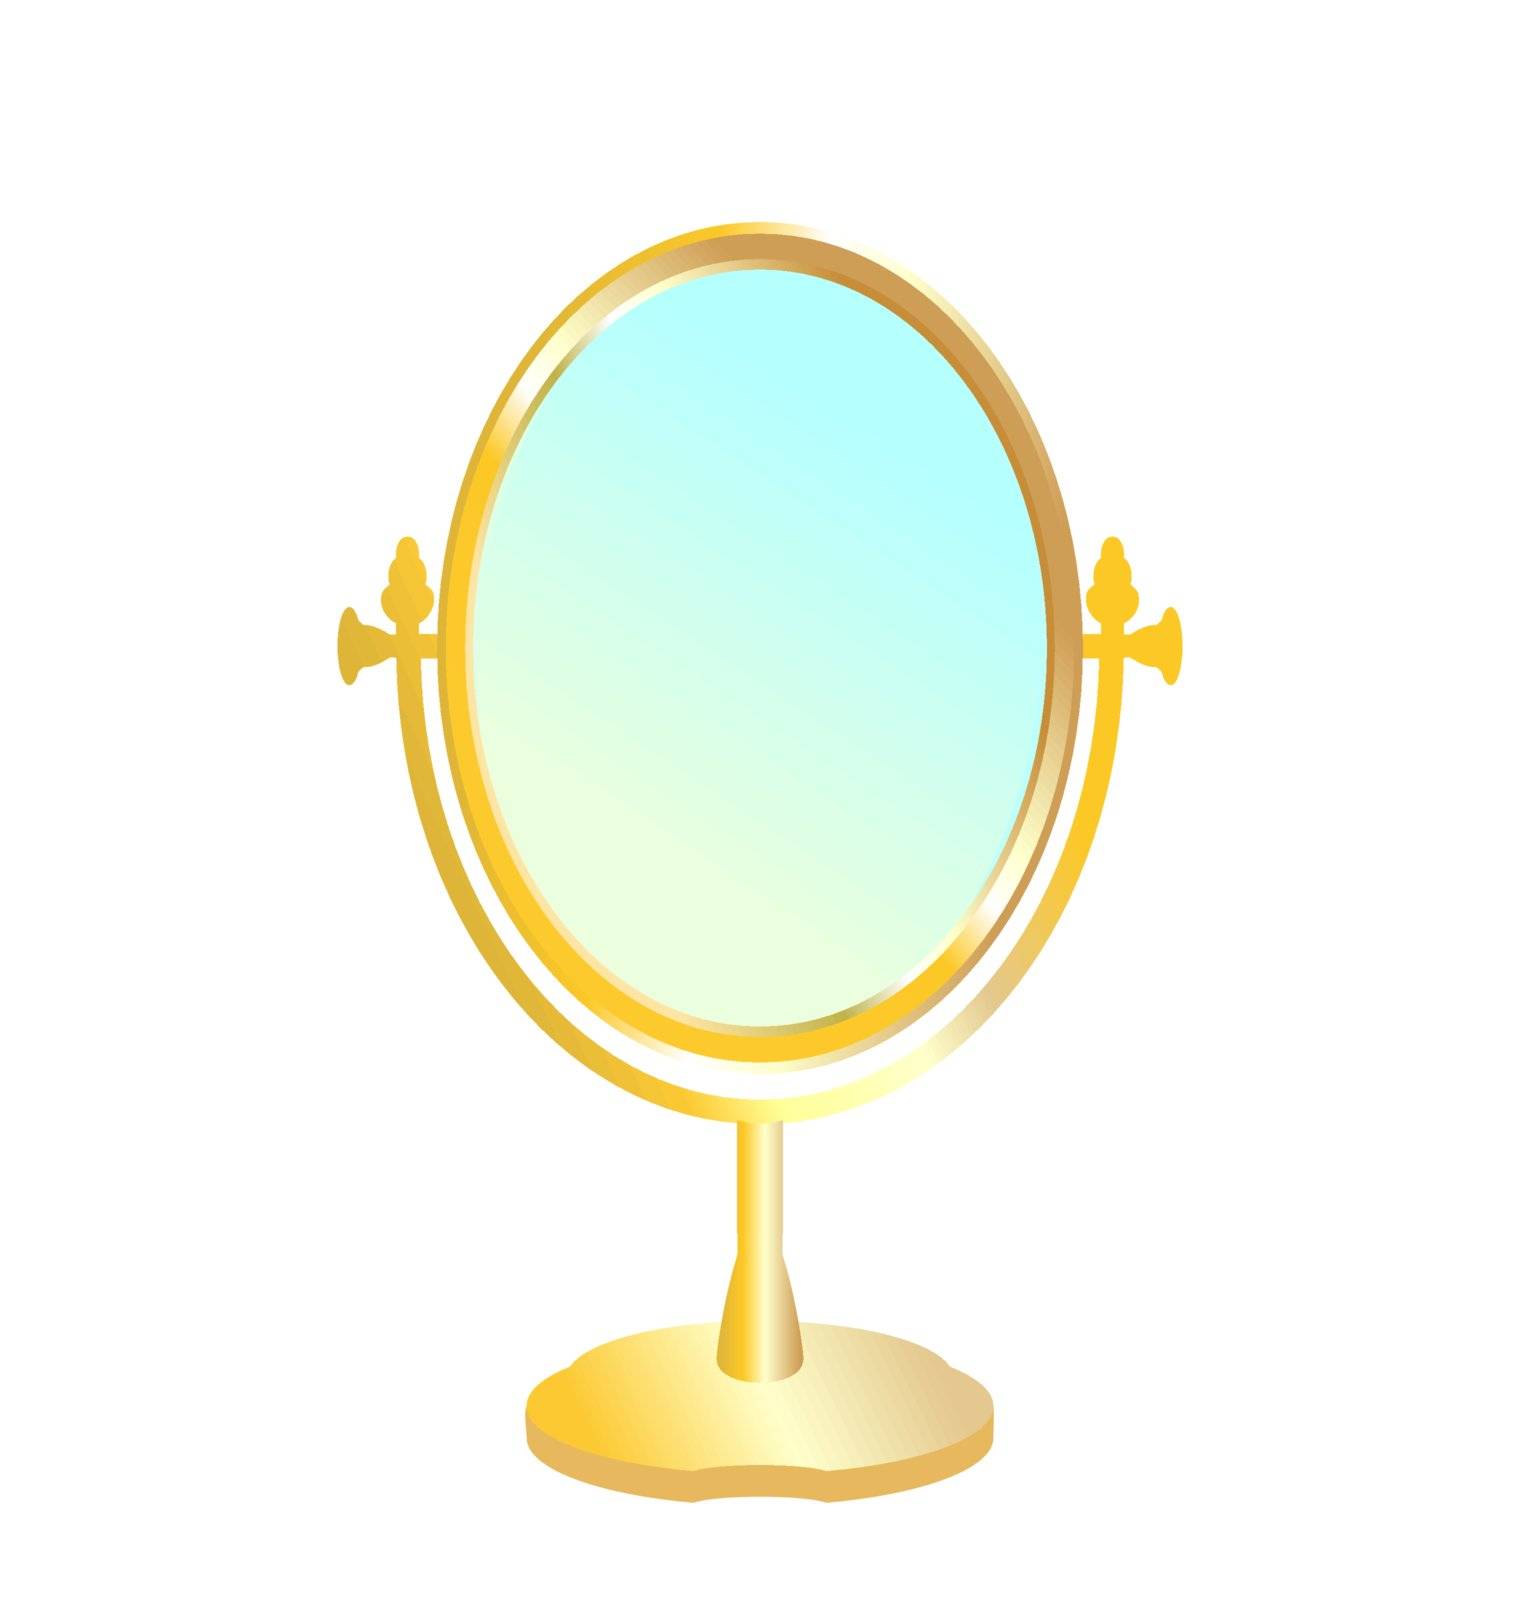 Realistic illustration of gold mirror isolated on white background - vector